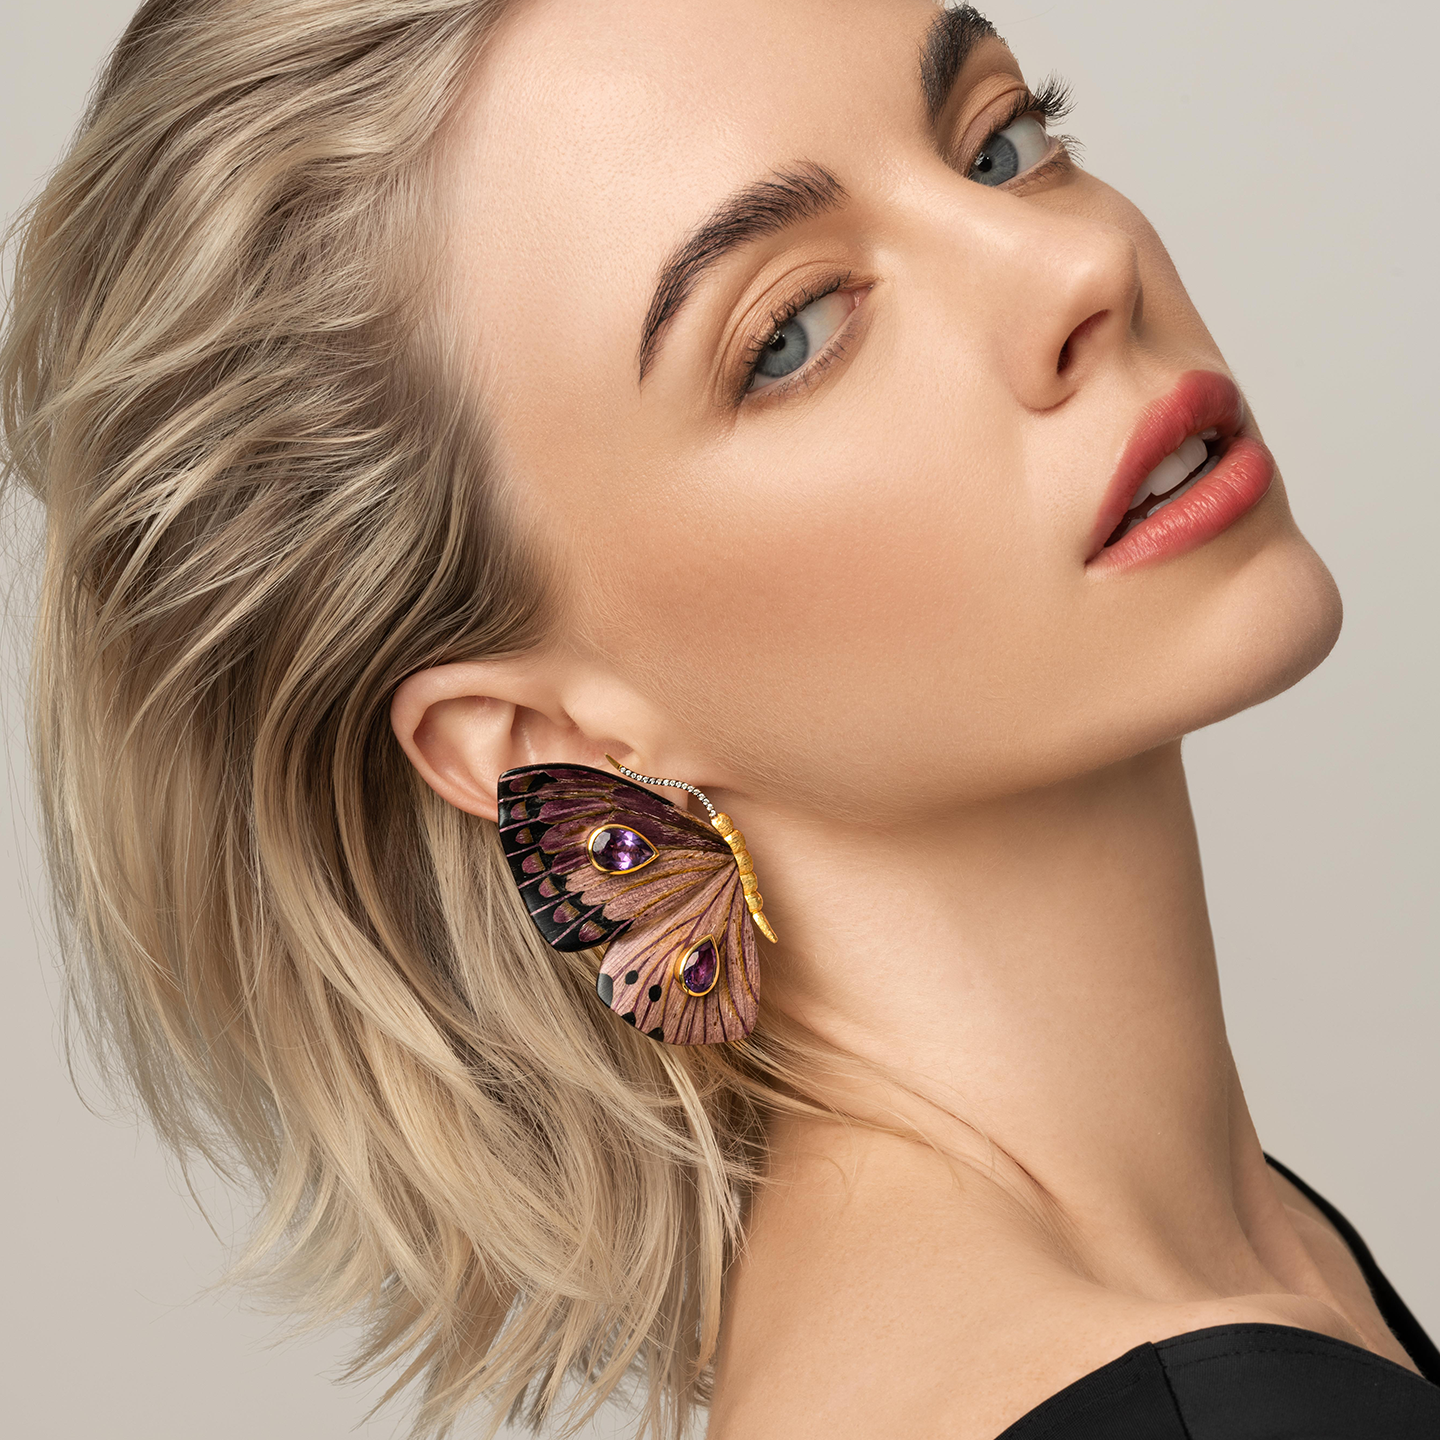 Silvia Furmanovich Marquetry Large Butterfly Earrings with Amethyst and Diamonds